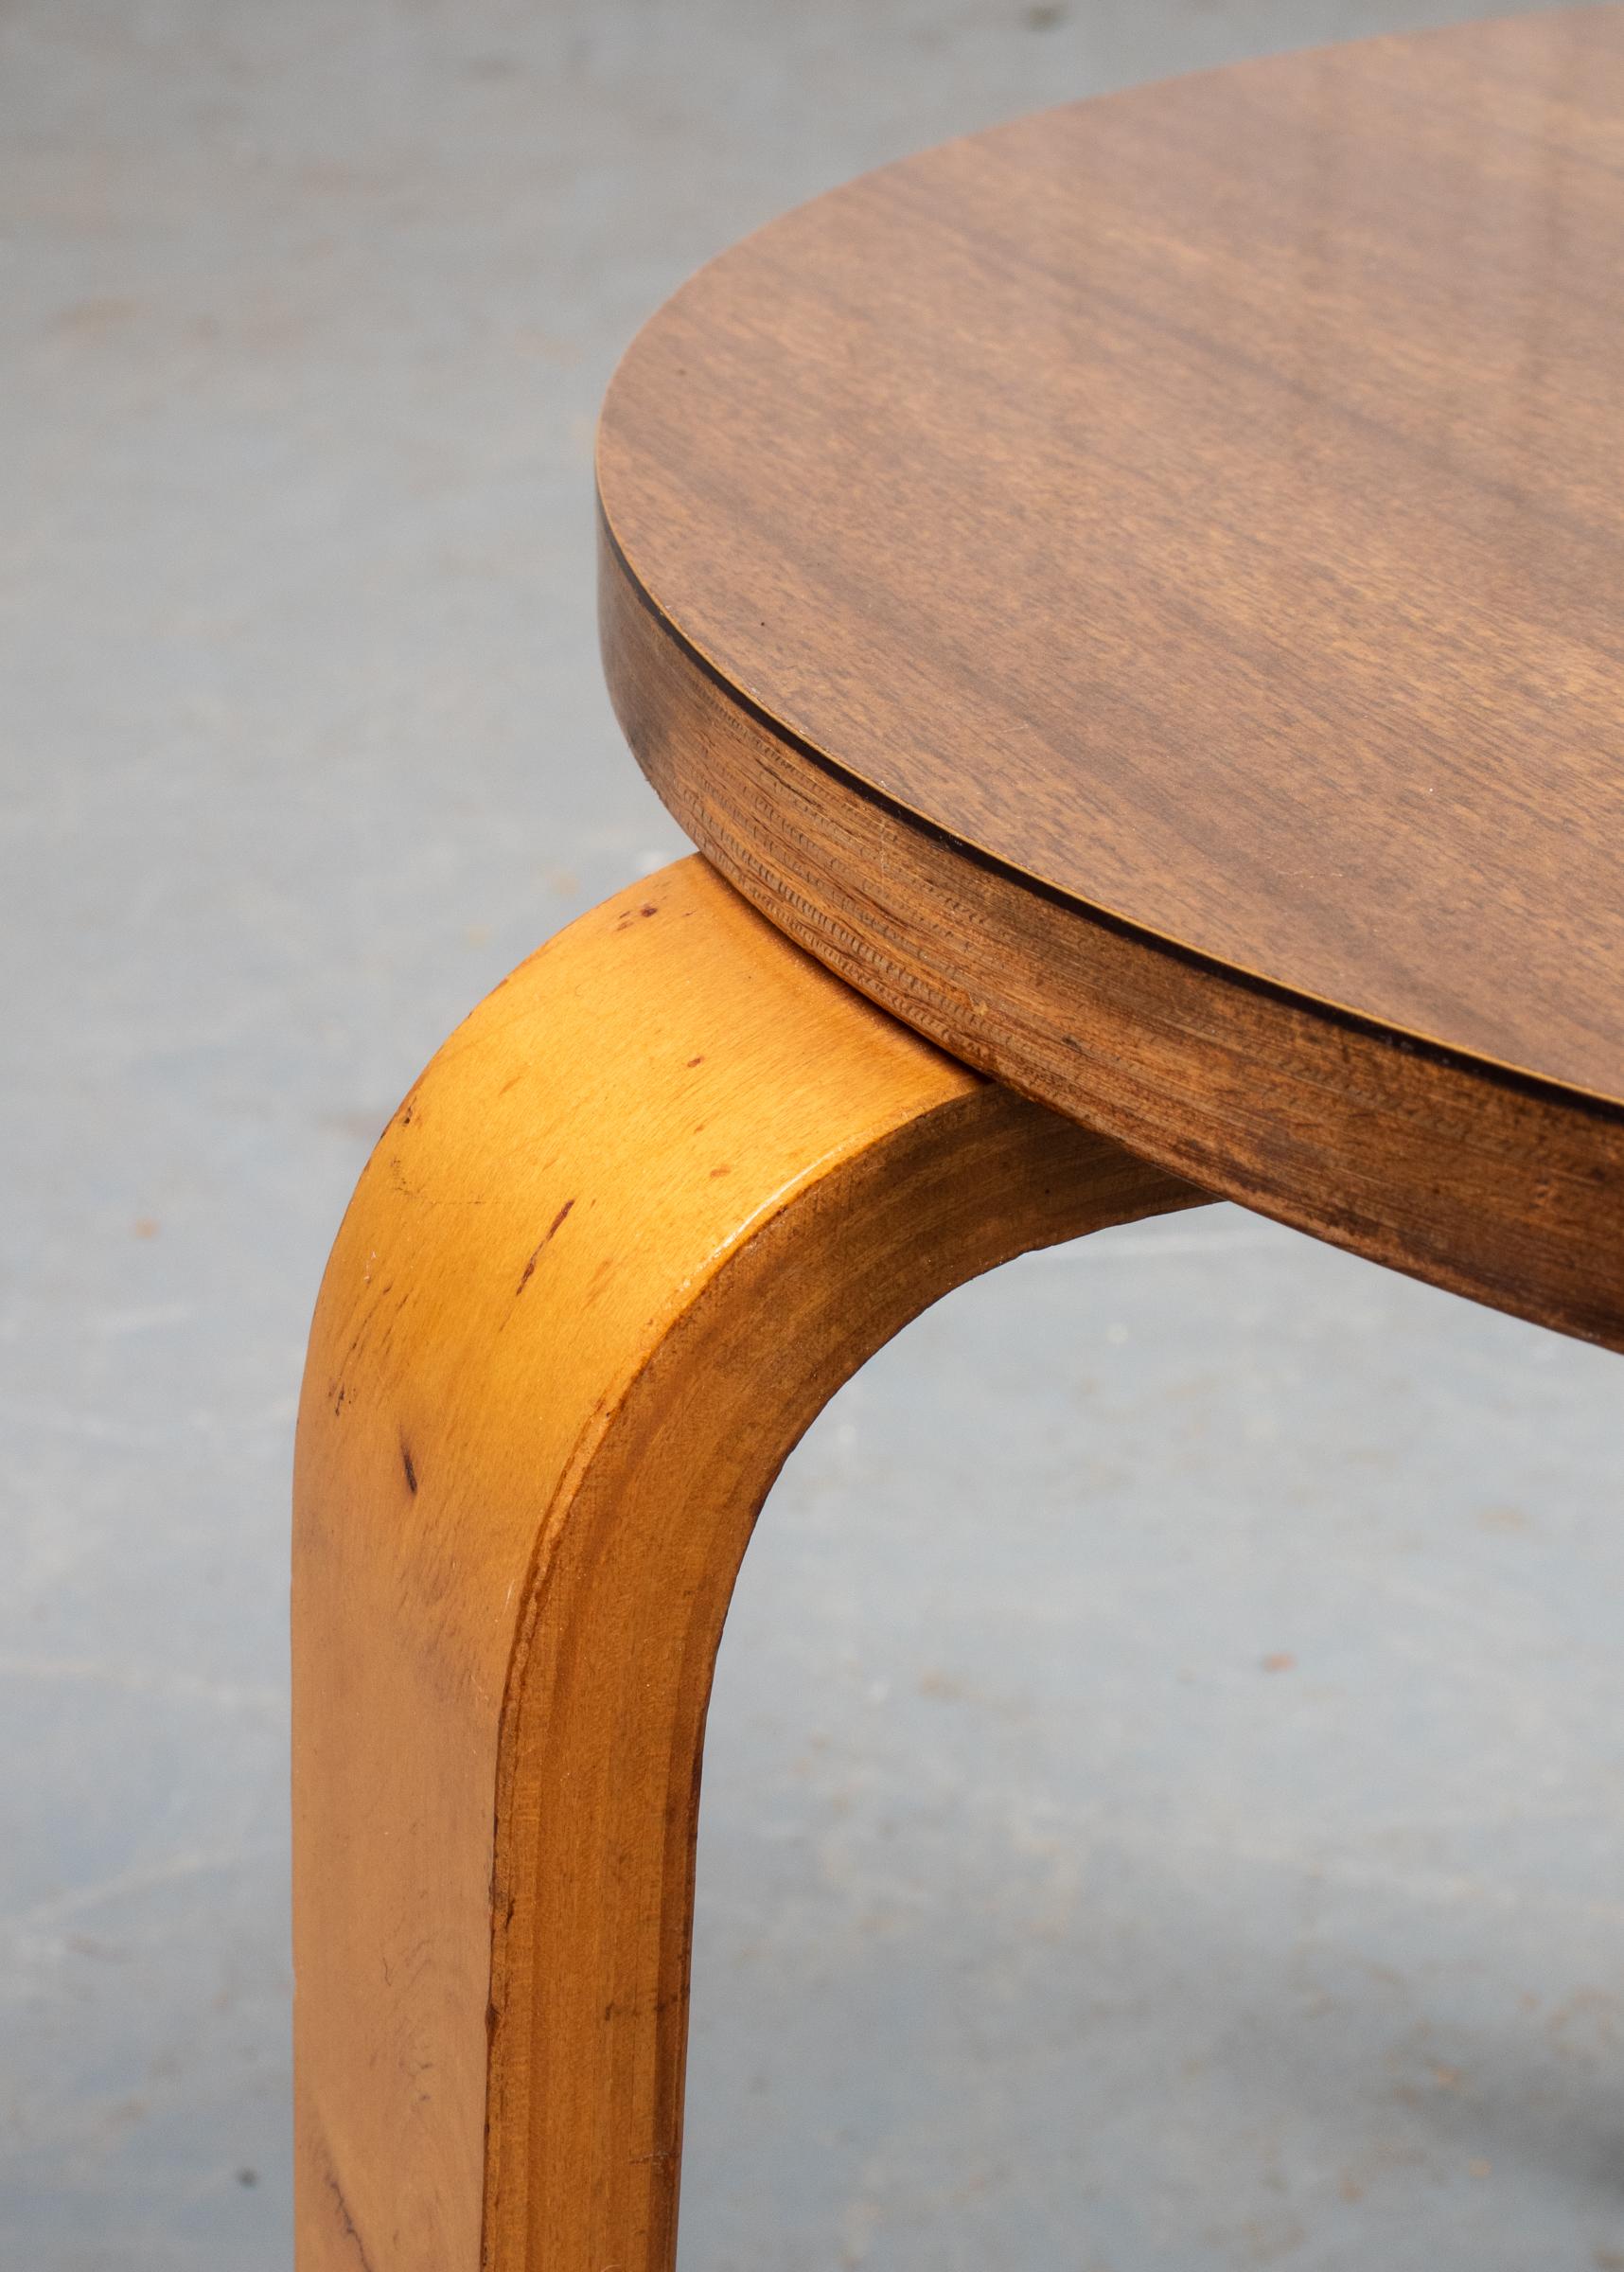 Danish Modern side / occasional three leg table, after the Model 60 stacking stool by Avar Aalto (Finnish 1898-1976), the round laminate top over three L-form teak legs. Measures: 15.5